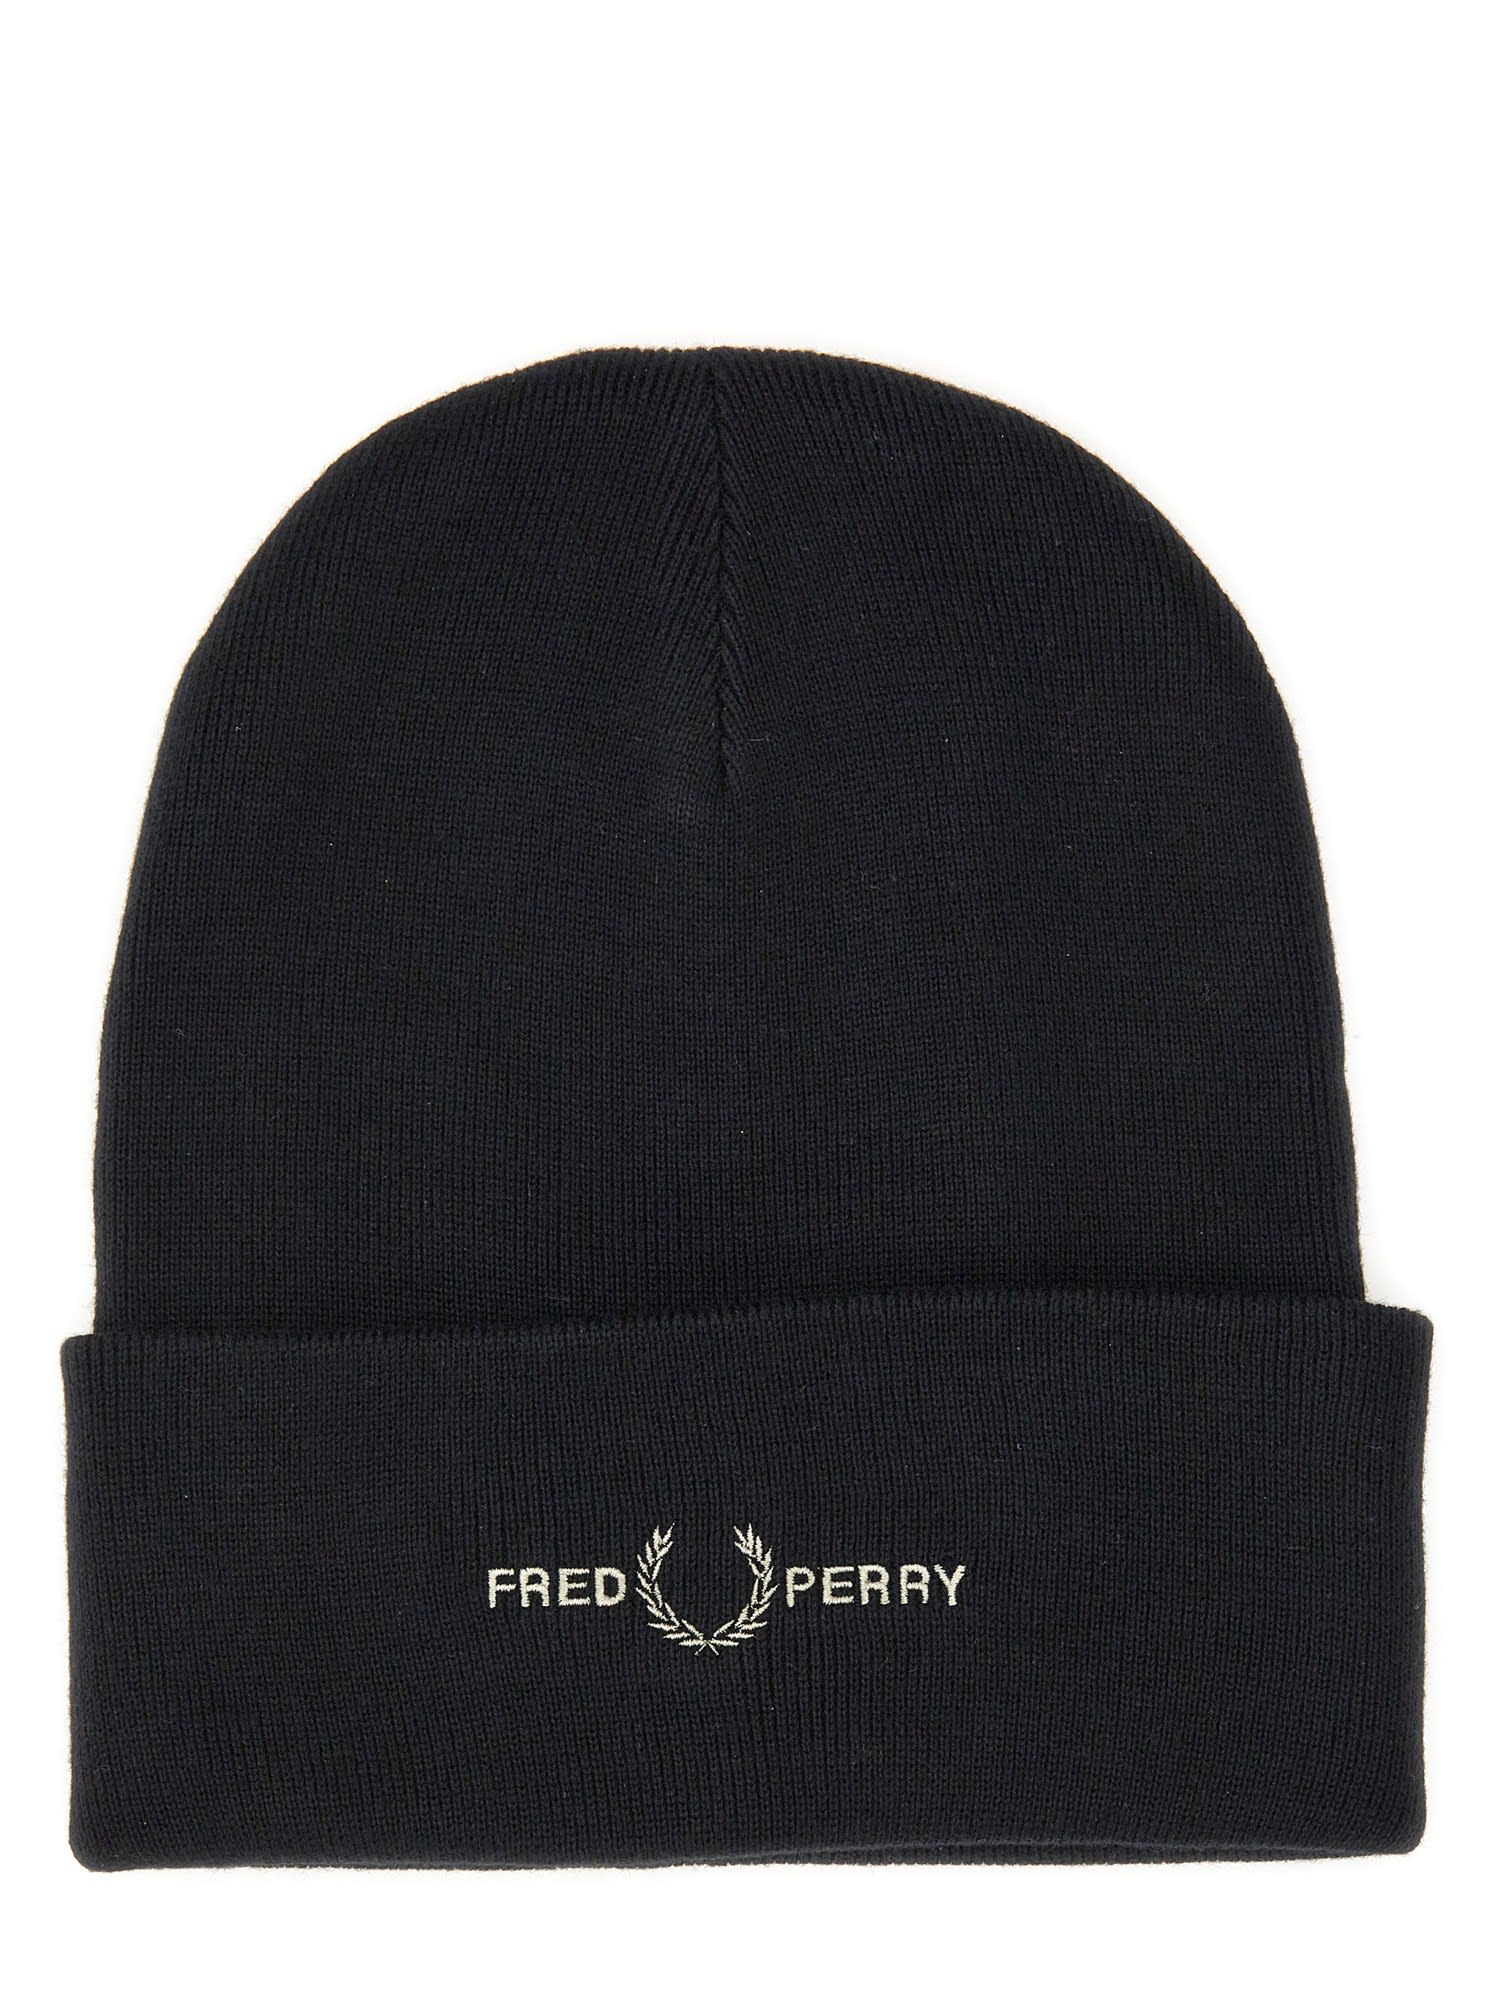 FRED PERRY BEANIE HAT